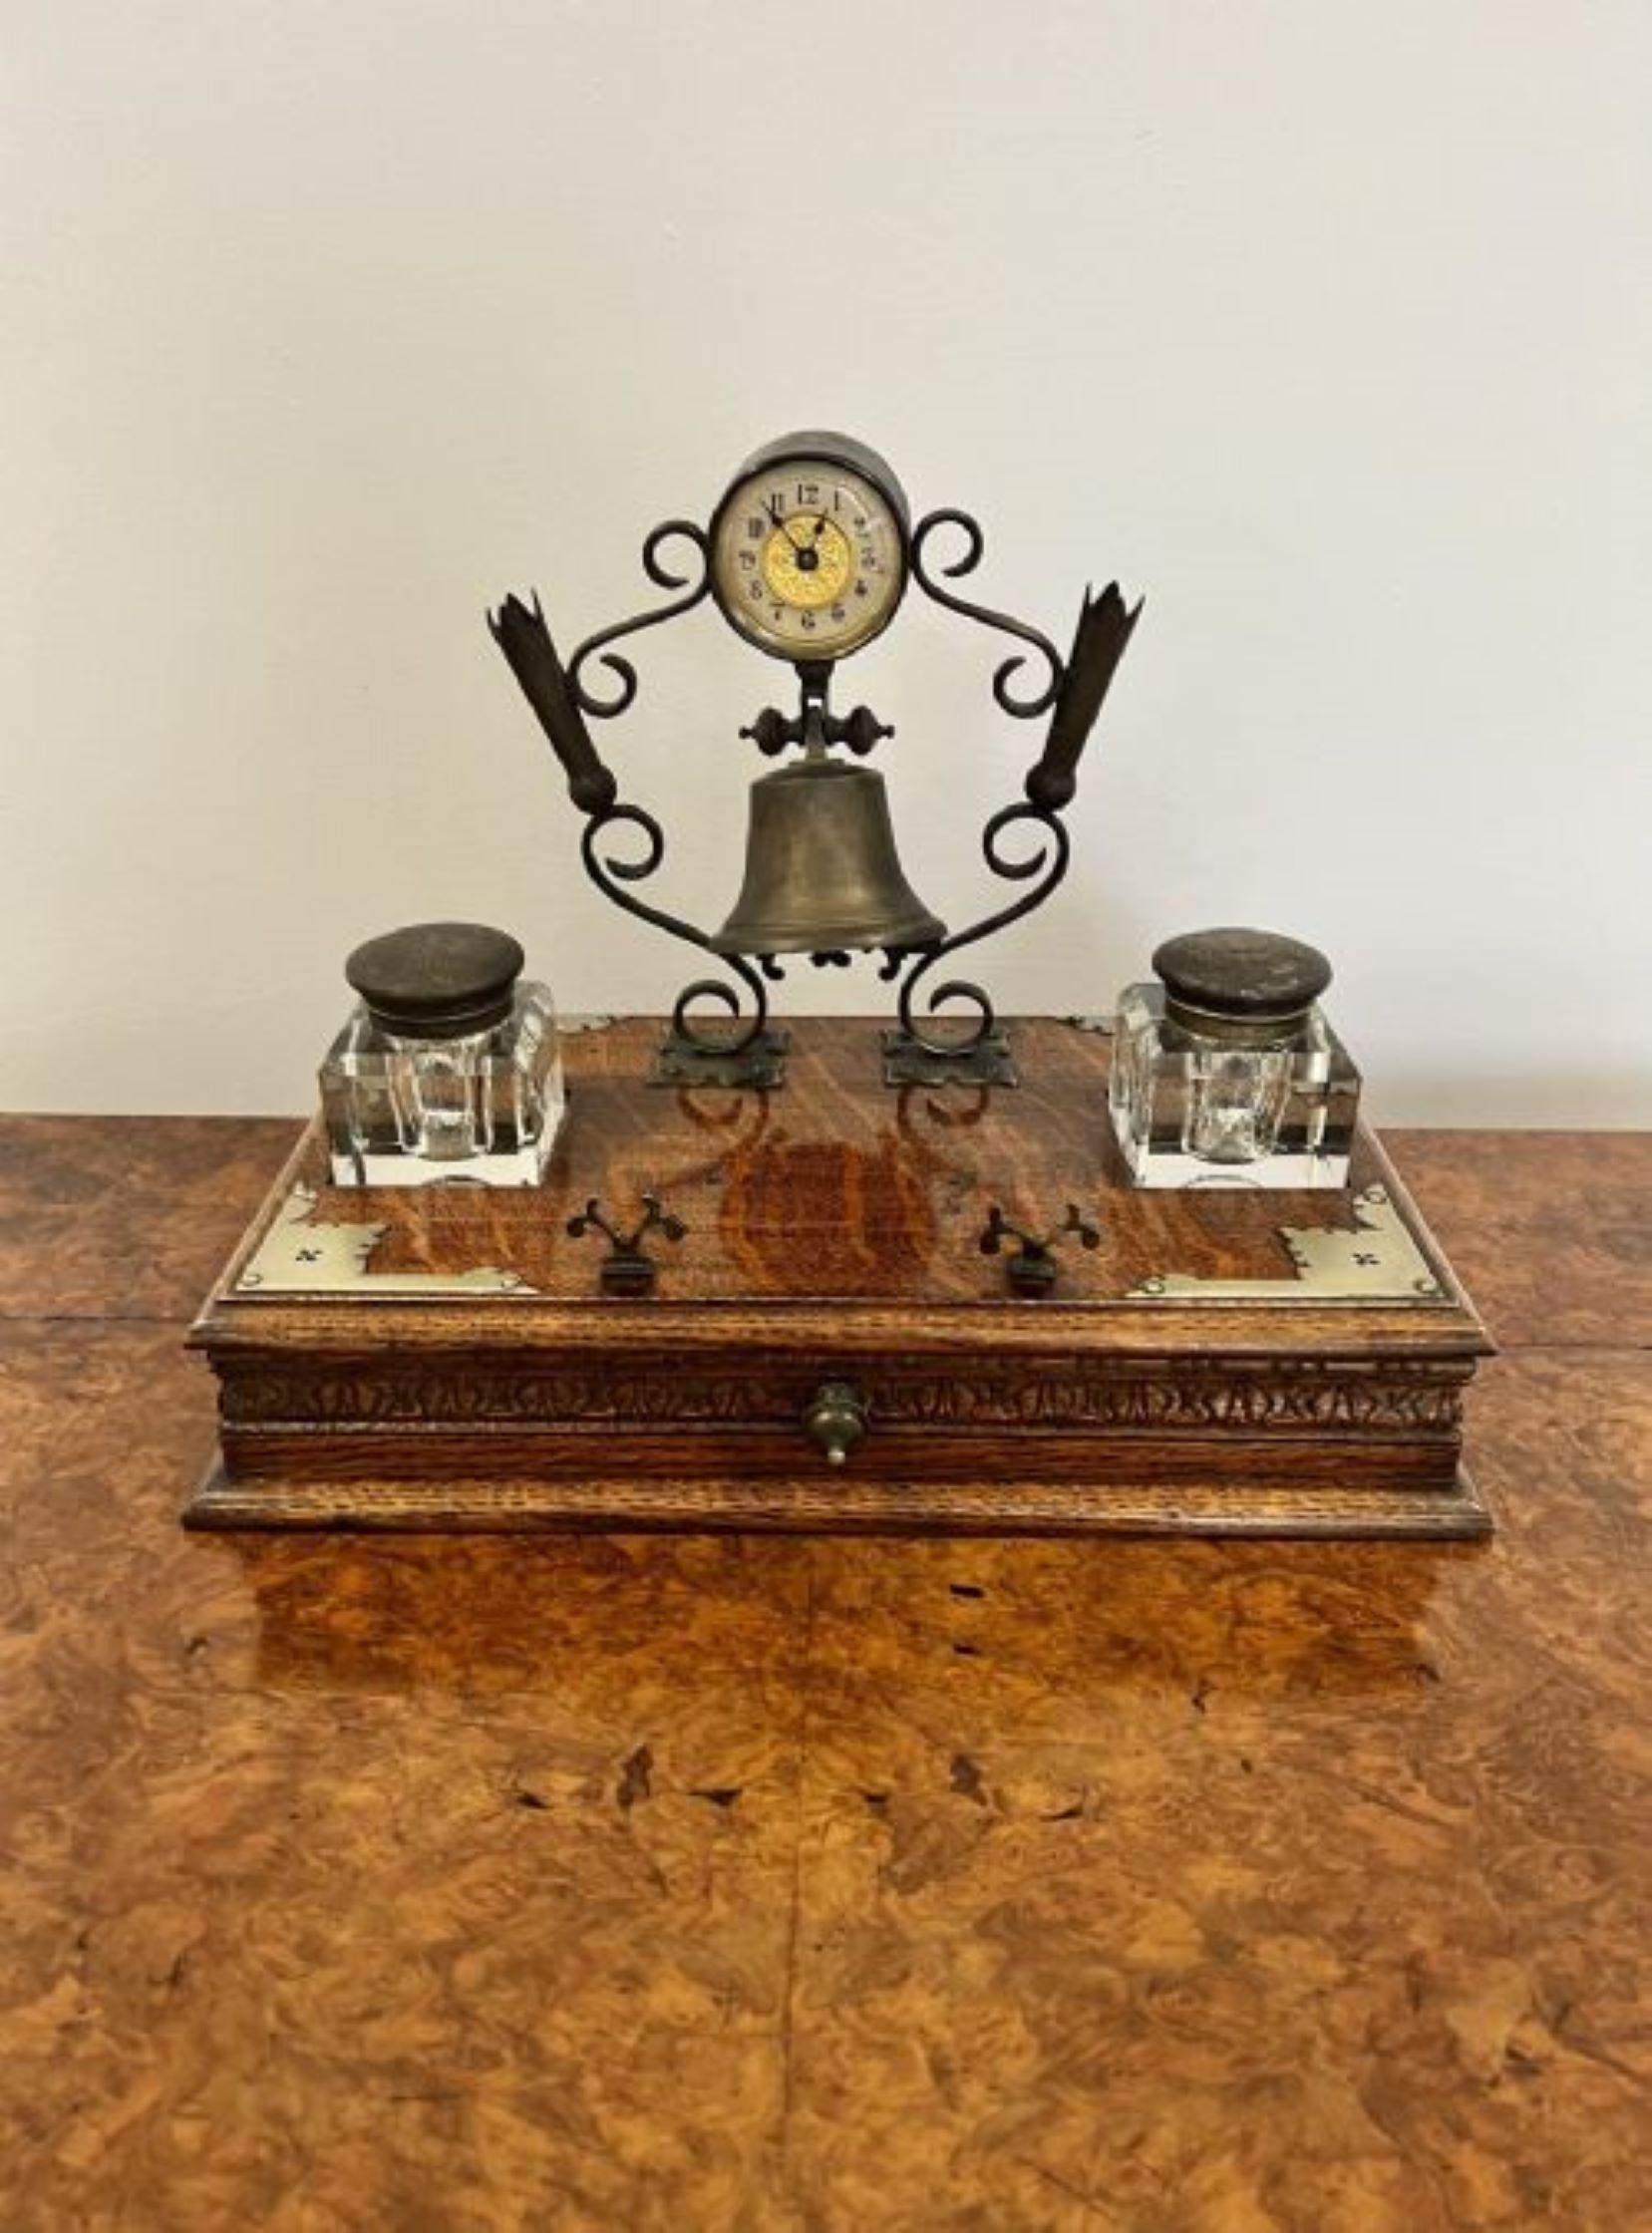 Unusual quality antique Victorian desk set having a quality shaped brass stand with a circular clock, bell and pen holders, above an oak base with silver plated corners and the original pair of removable glass inkwells to the front a carved oak